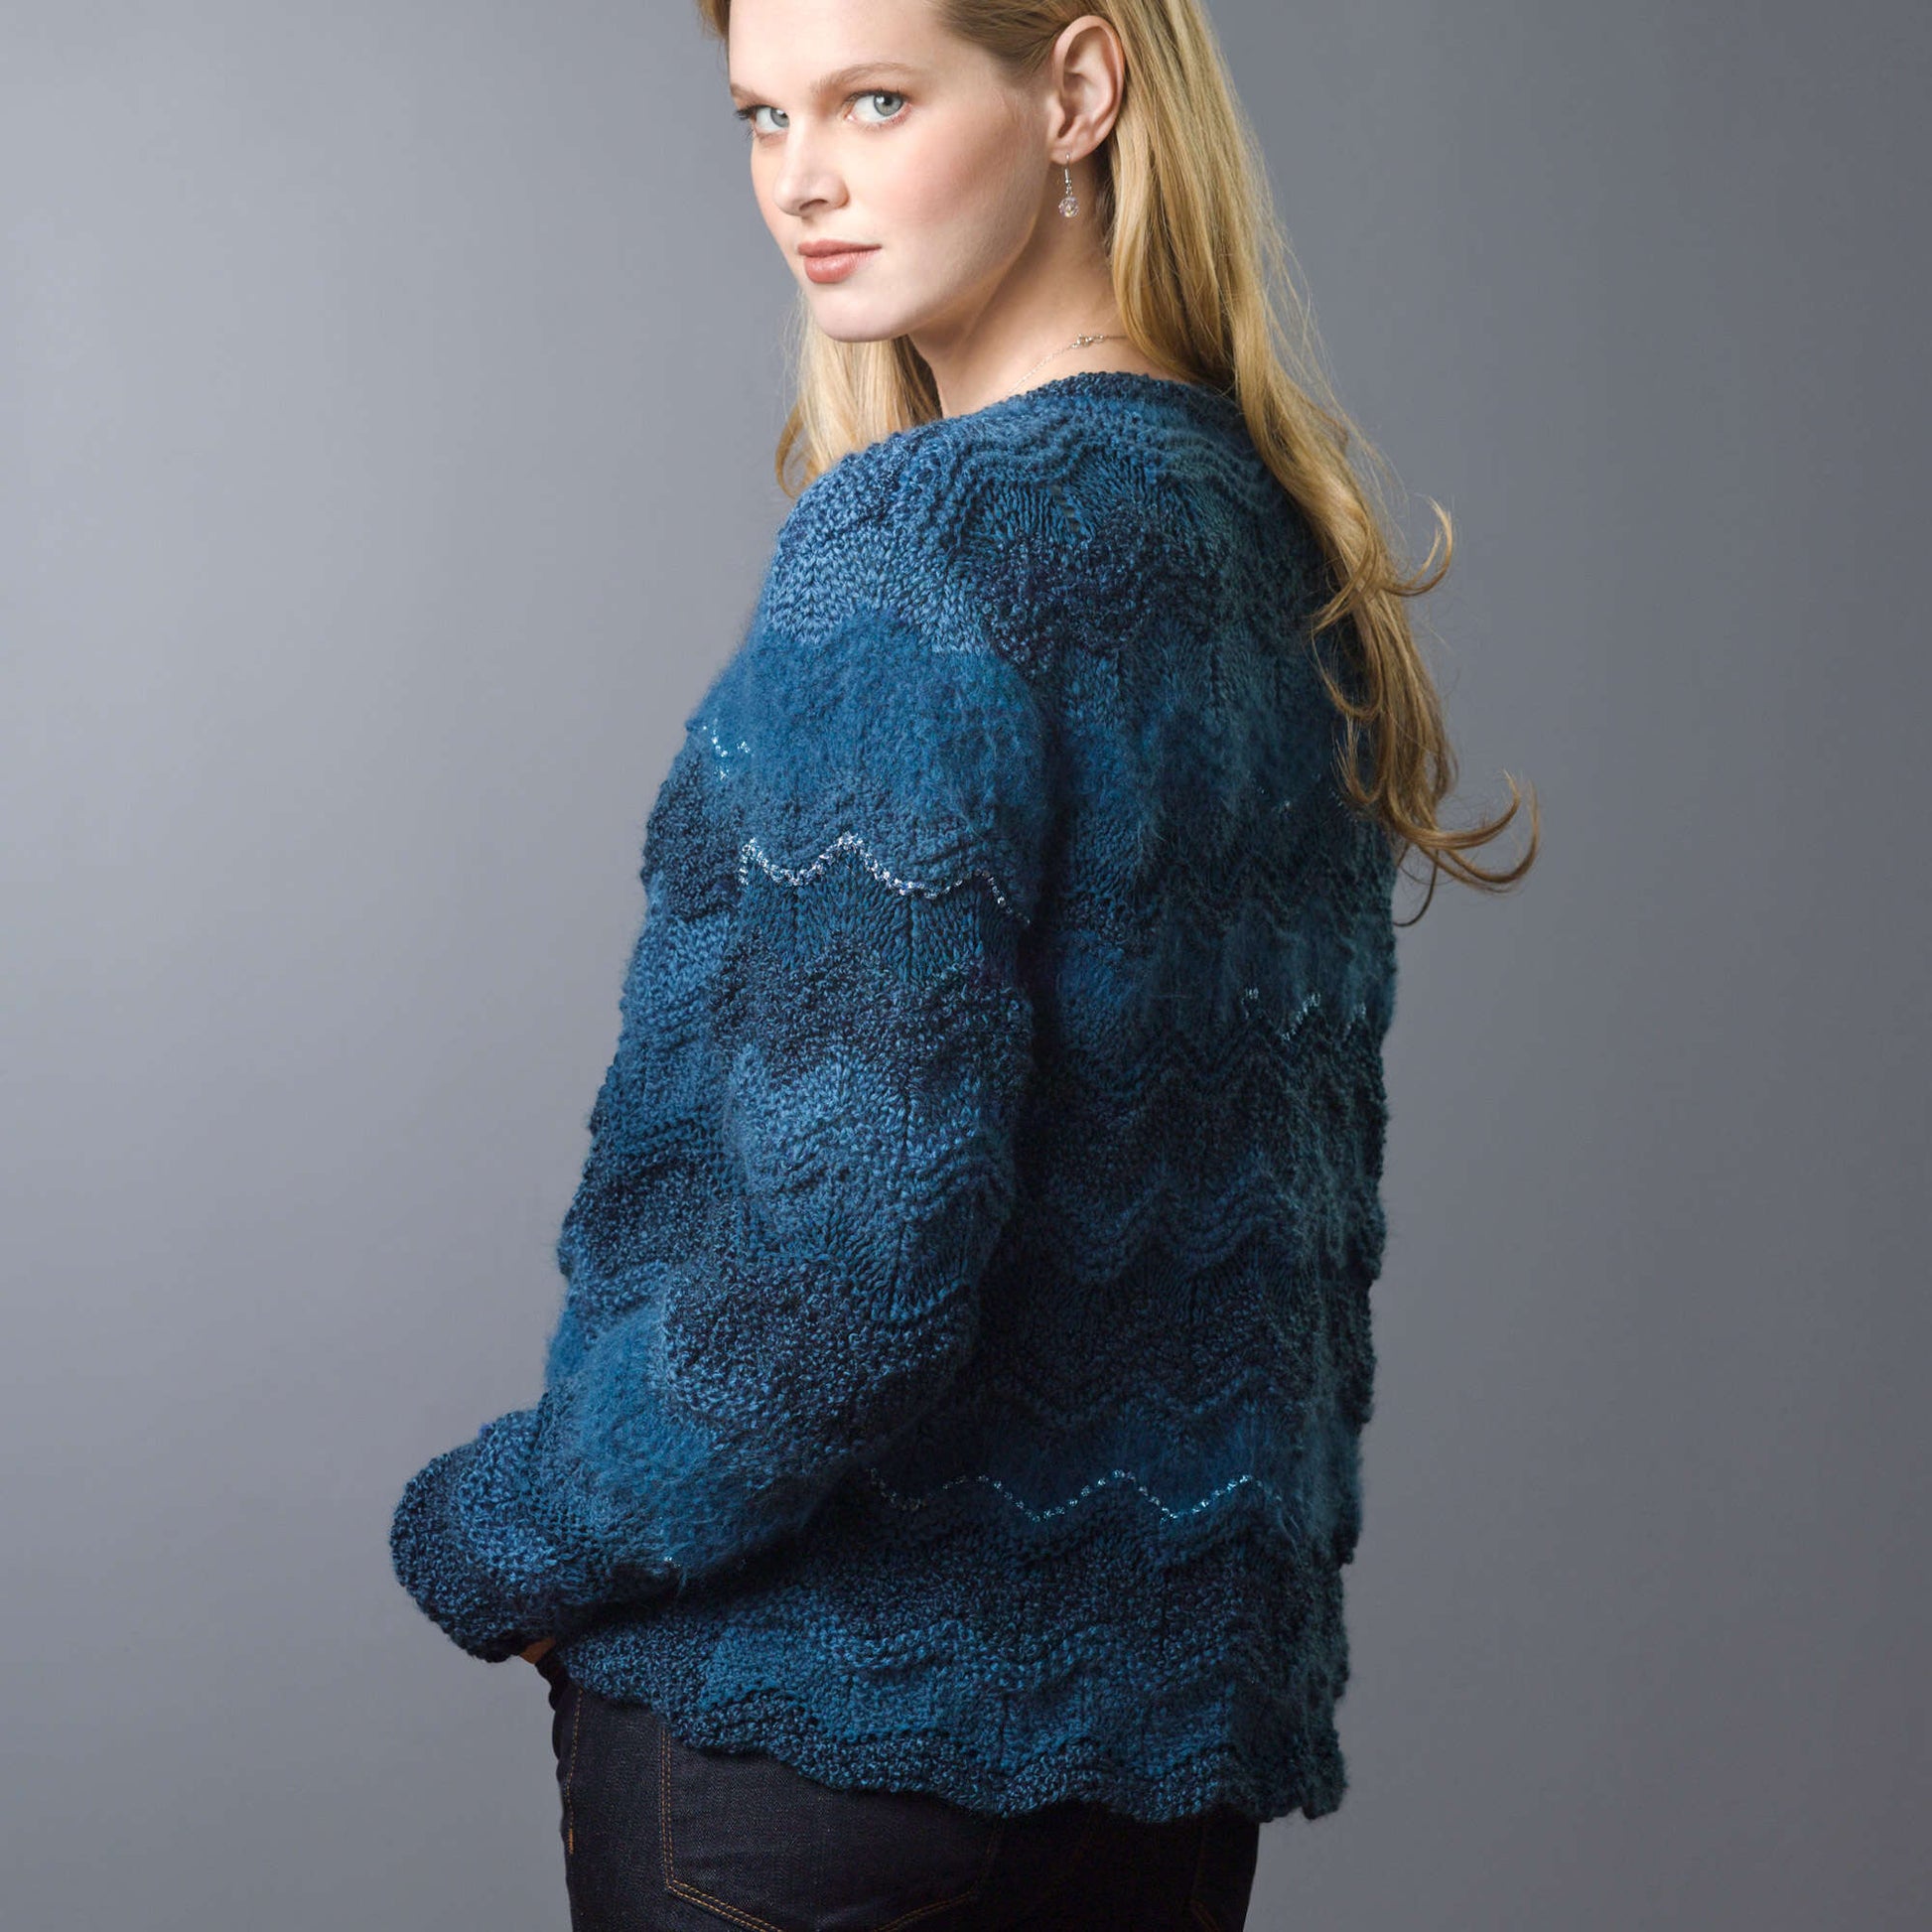 Free Red Heart Classic Glam Cardi Knit Pattern